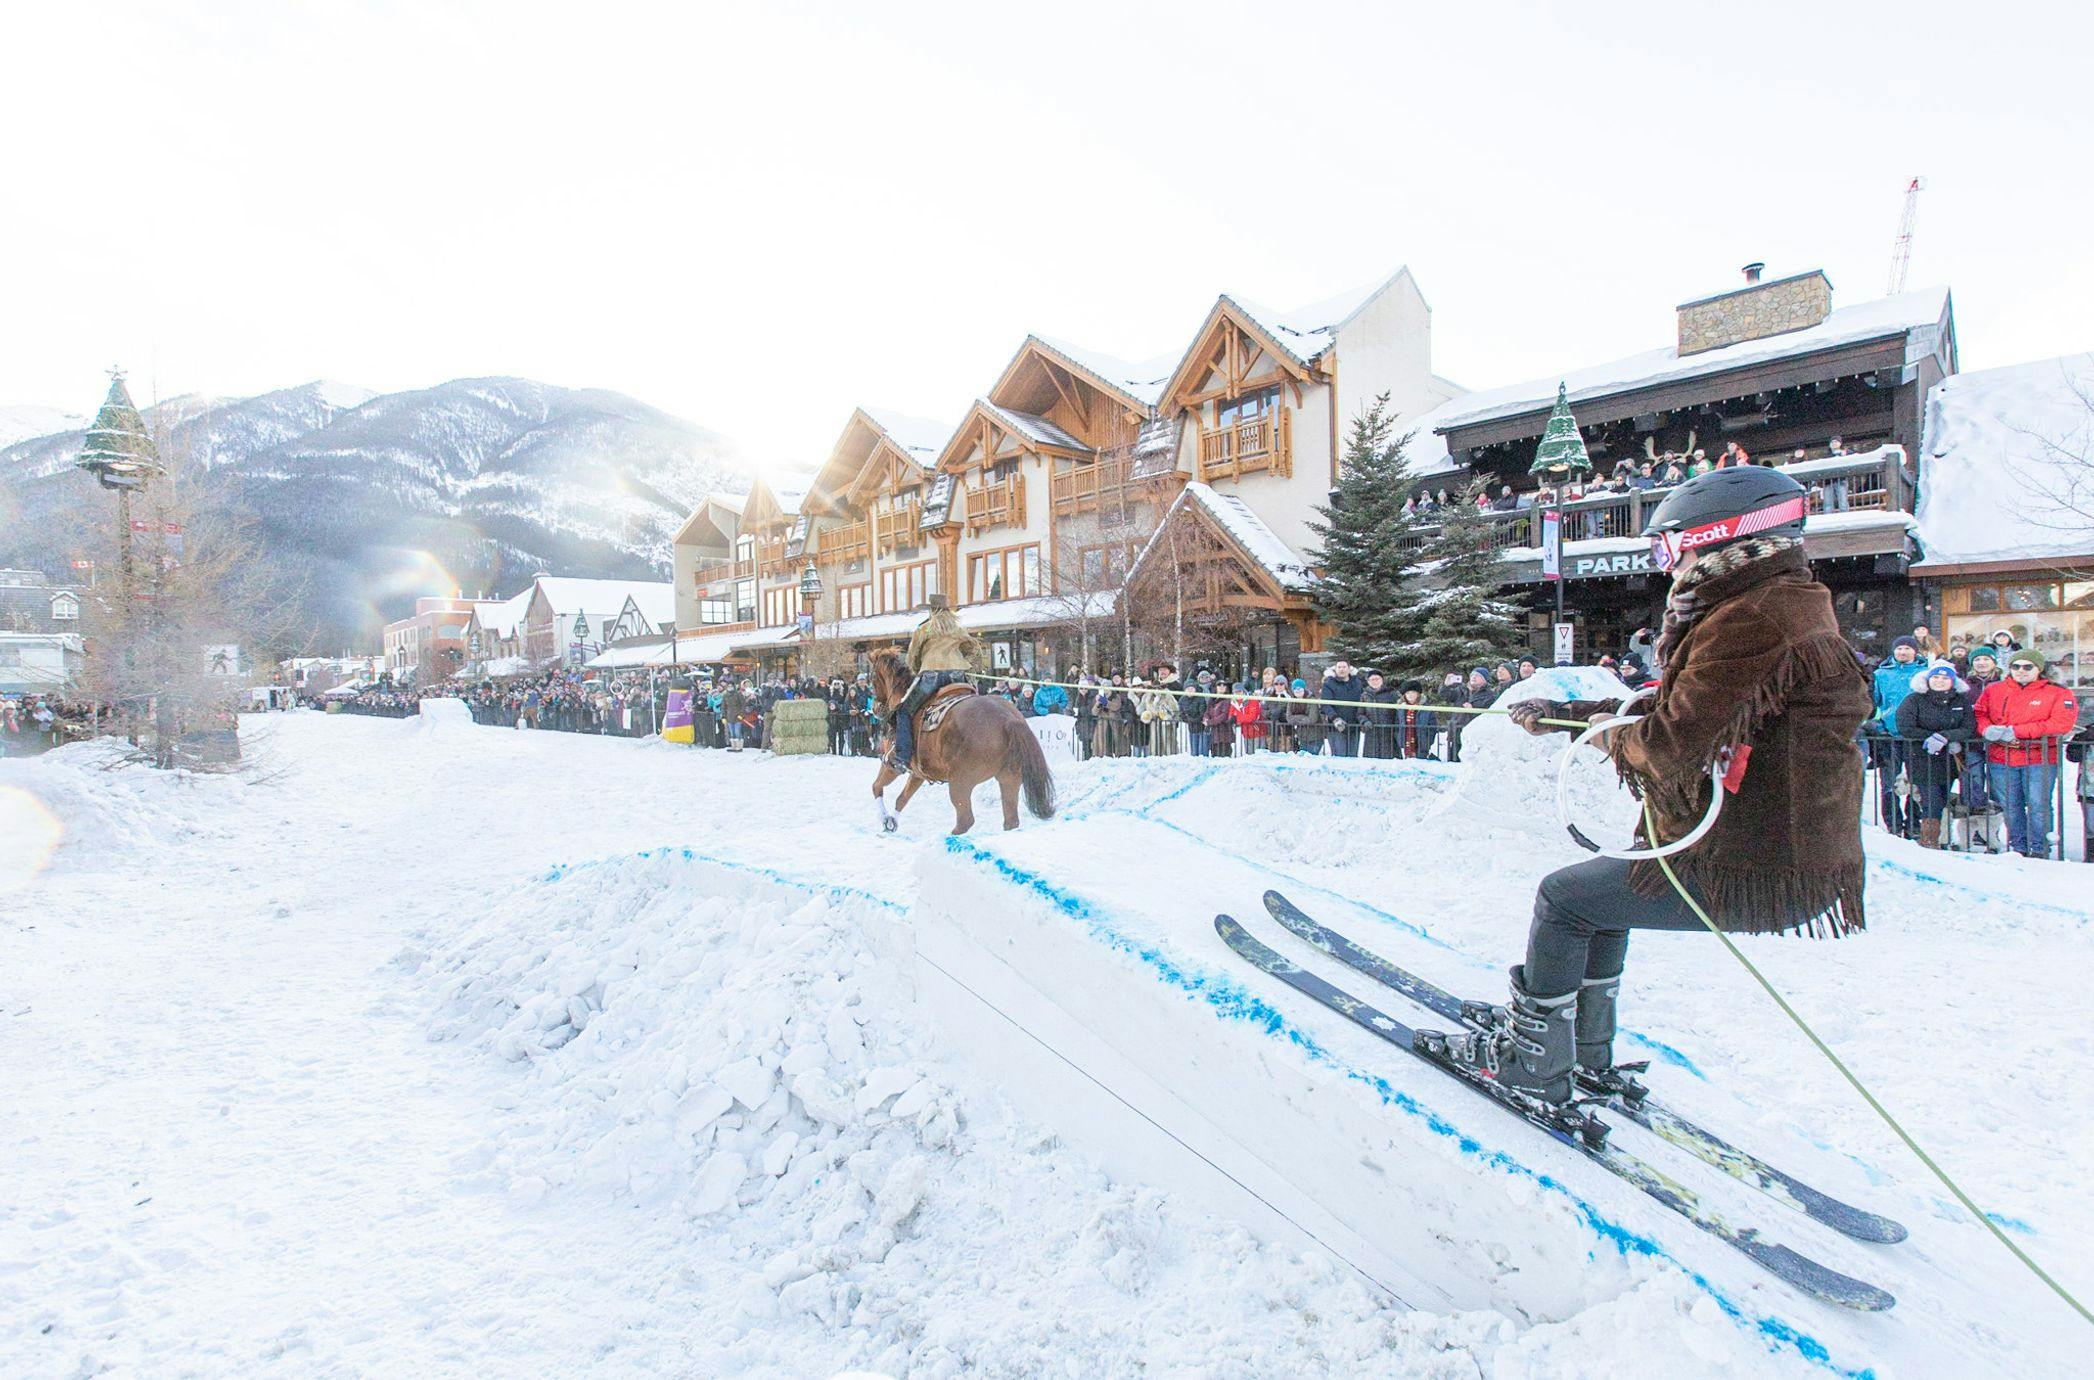 A horse pulls a trick skier over a snow jump in a Skijoring event on Banff Ave in Banff, Canada.